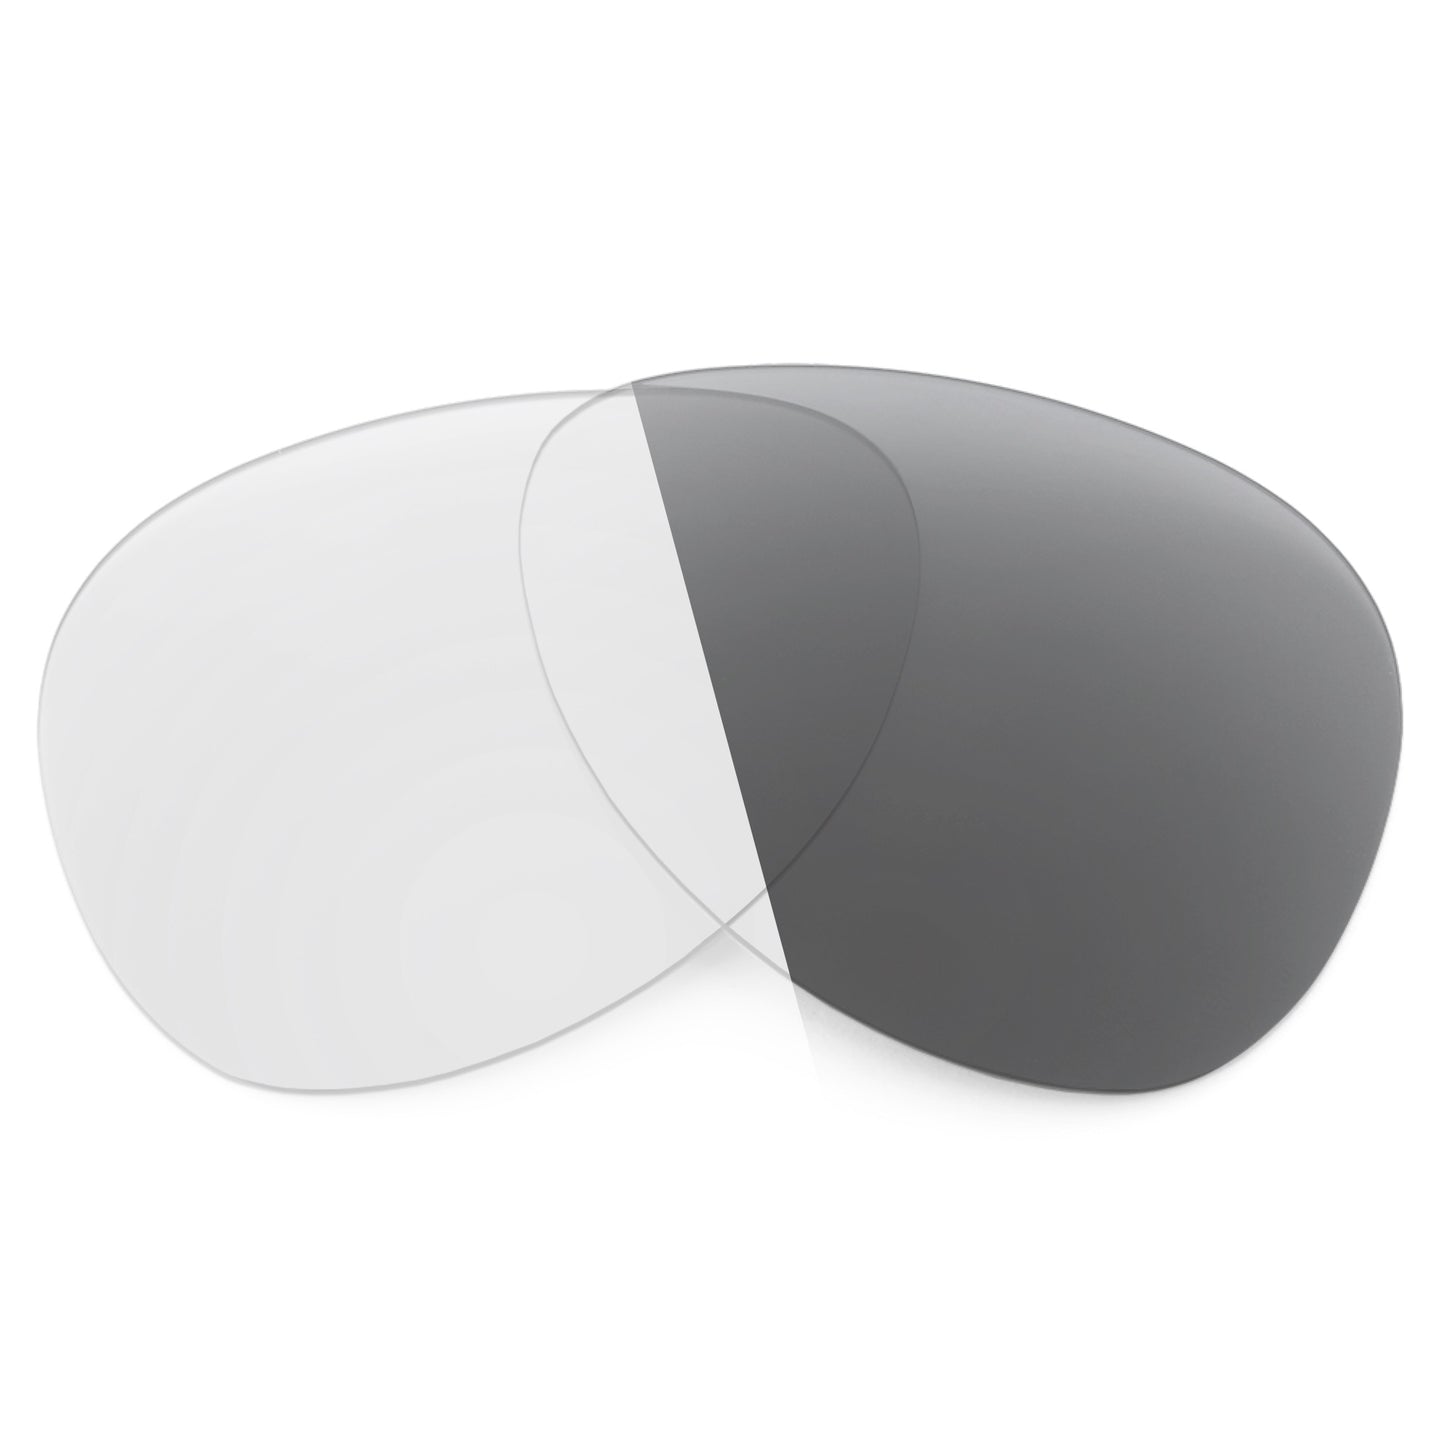 Revant replacement lenses for Ray-Ban RB8301 56mm Non-Polarized Adapt Gray Photochromic